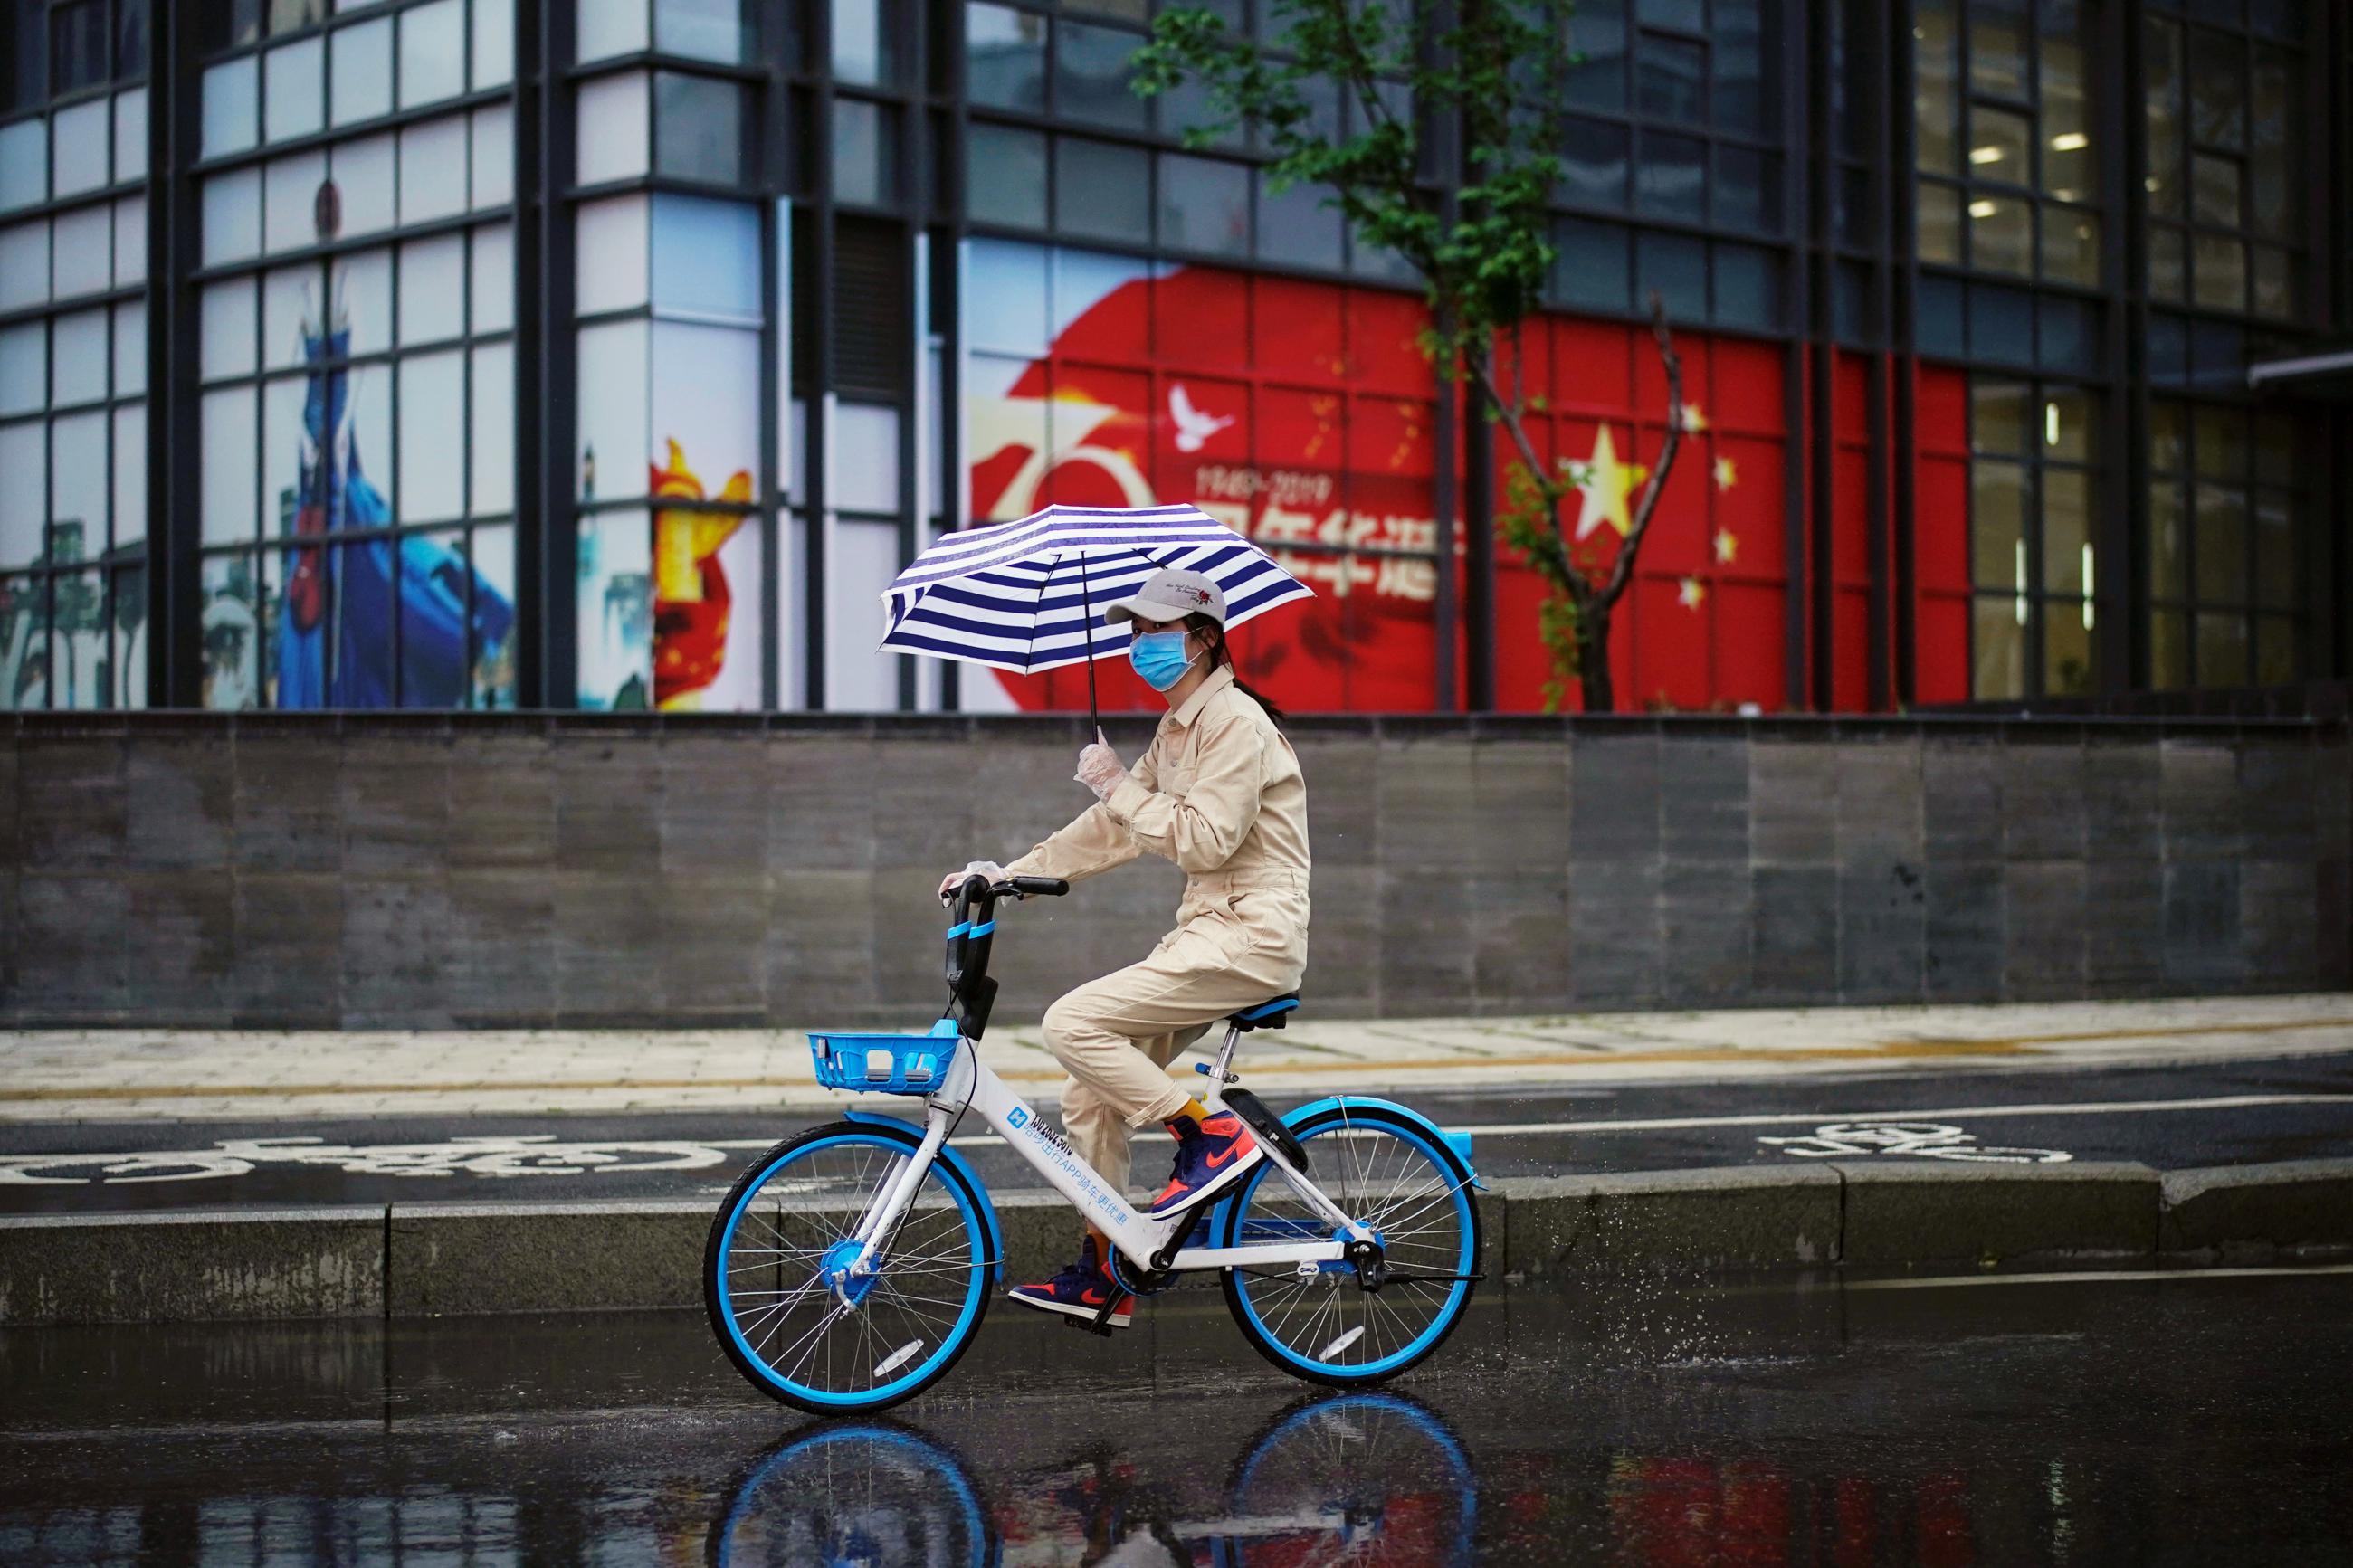 A woman holding an umbrella rides a shared bicycle past an image of the Chinese flag after the lockdown was lifted in Wuhan, the capital of Hubei province and China's epicentre of the novel coronavirus disease (COVID-19) outbreak, April 10, 2020.